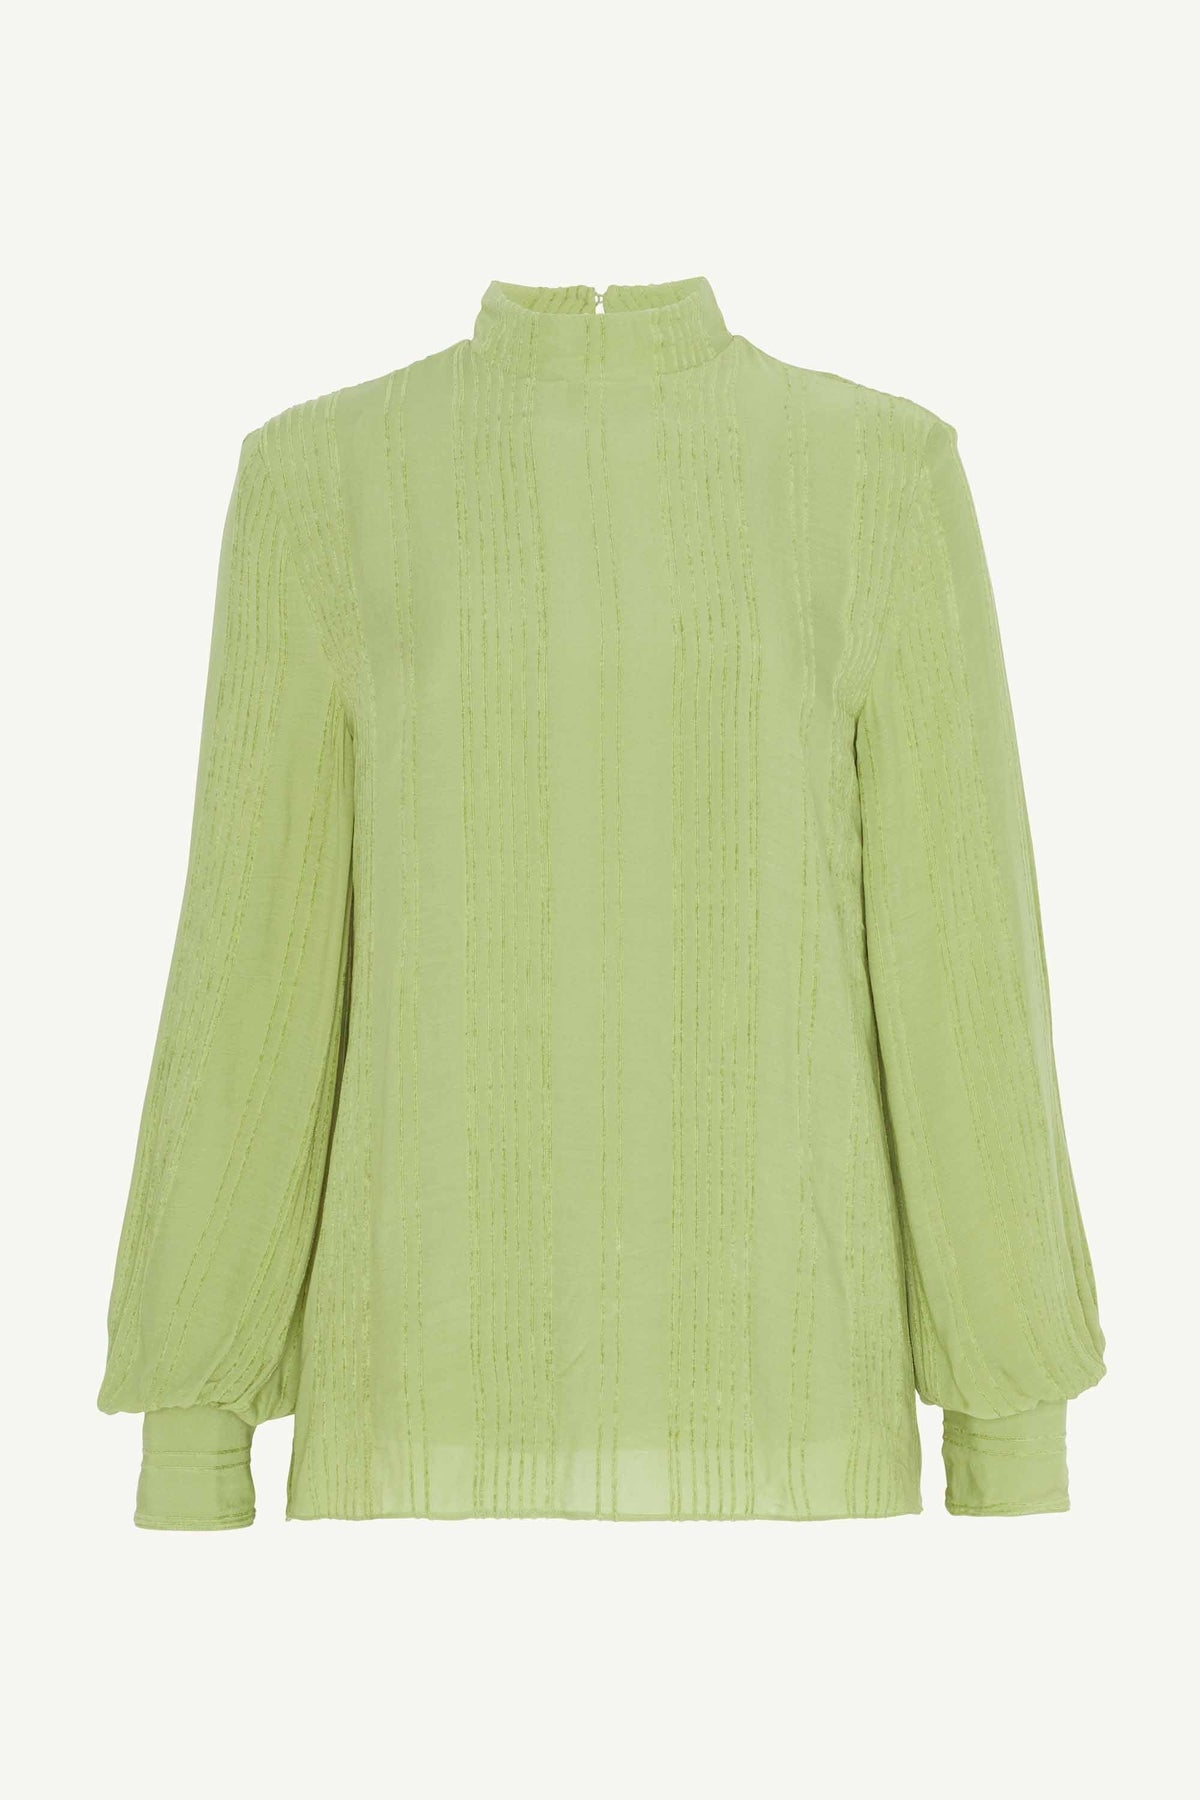 Textured Rayon Balloon Sleeve Blouse - Fern Green Clothing Veiled Collection 